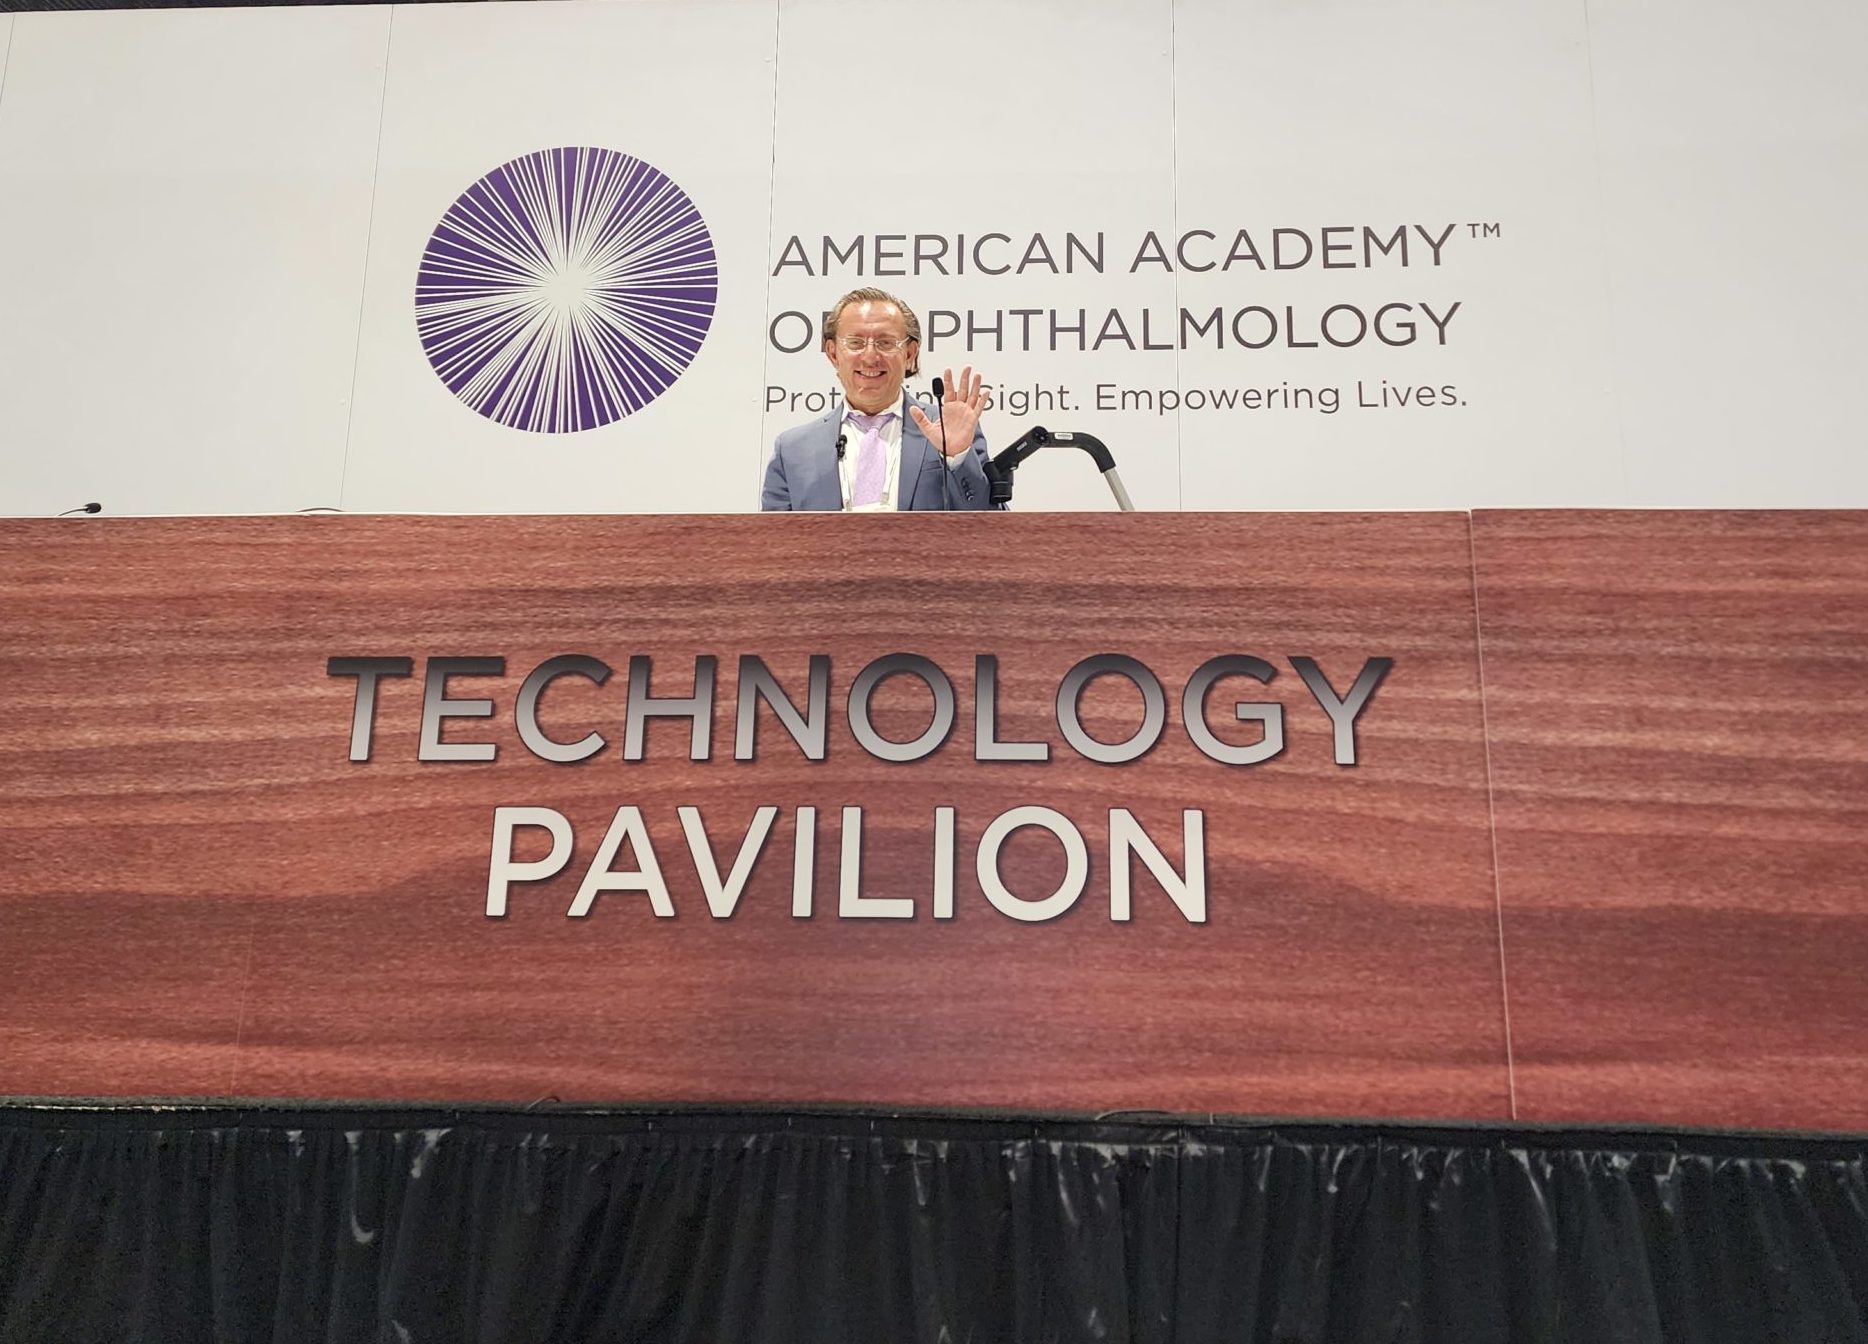 Innovative Tonometer DIATON Featured at the American Academy of Ophthalmology Latest Technology Pavilion